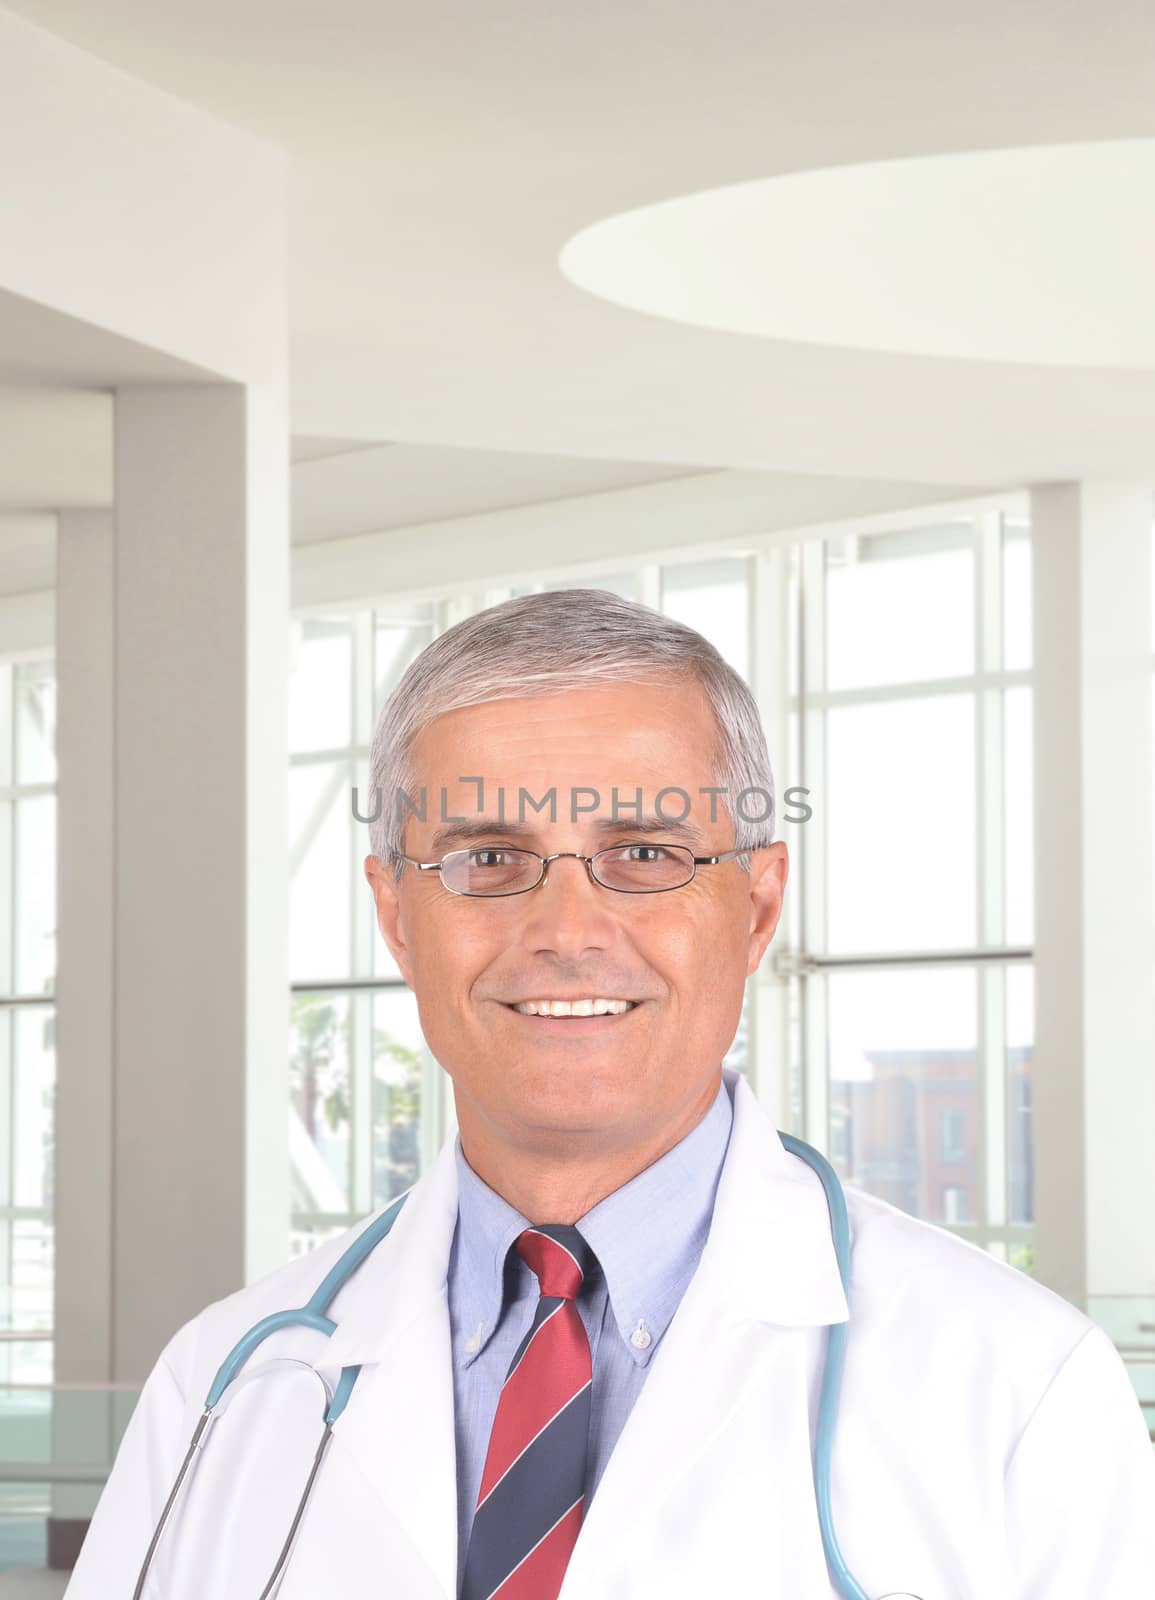 Portrait of a middle aged doctor in modern medical office setting